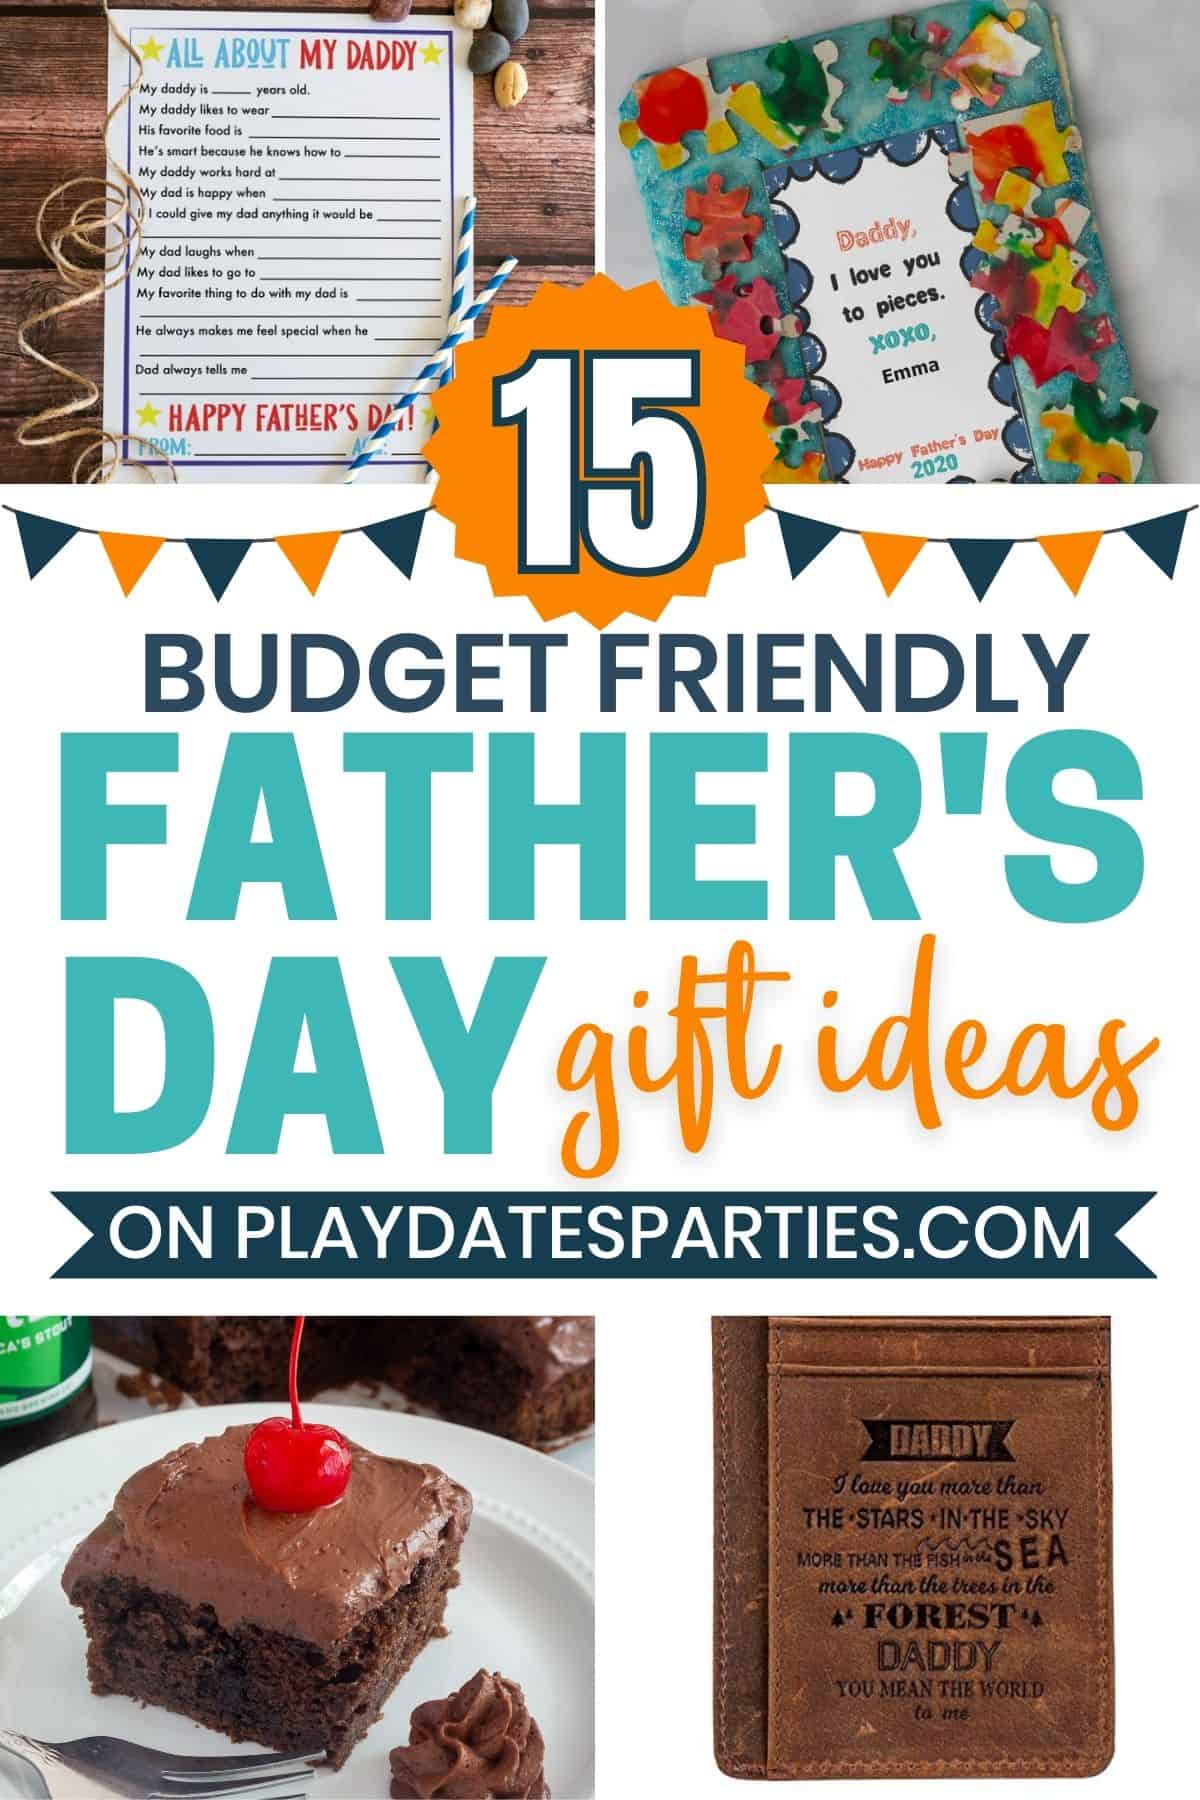 Budget Friendly Father's Day gift ideas Pin image.